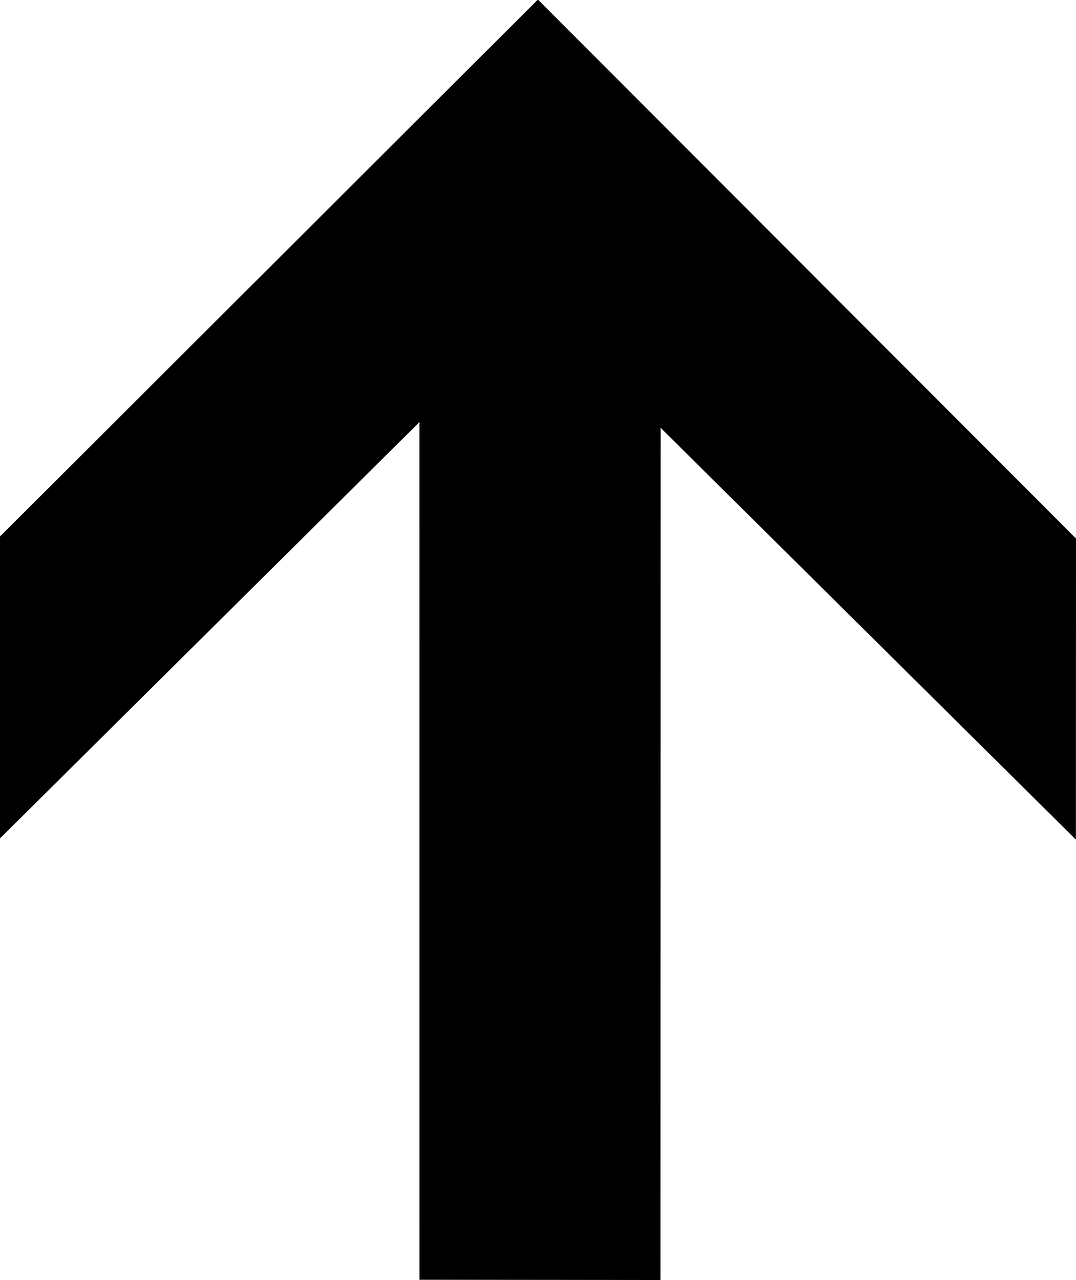 a black arrow symbol on a white background, inspired by Carlos Enríquez Gómez, 3 5 mm pointing up, view from bottom to top, no - text no - logo, pathway